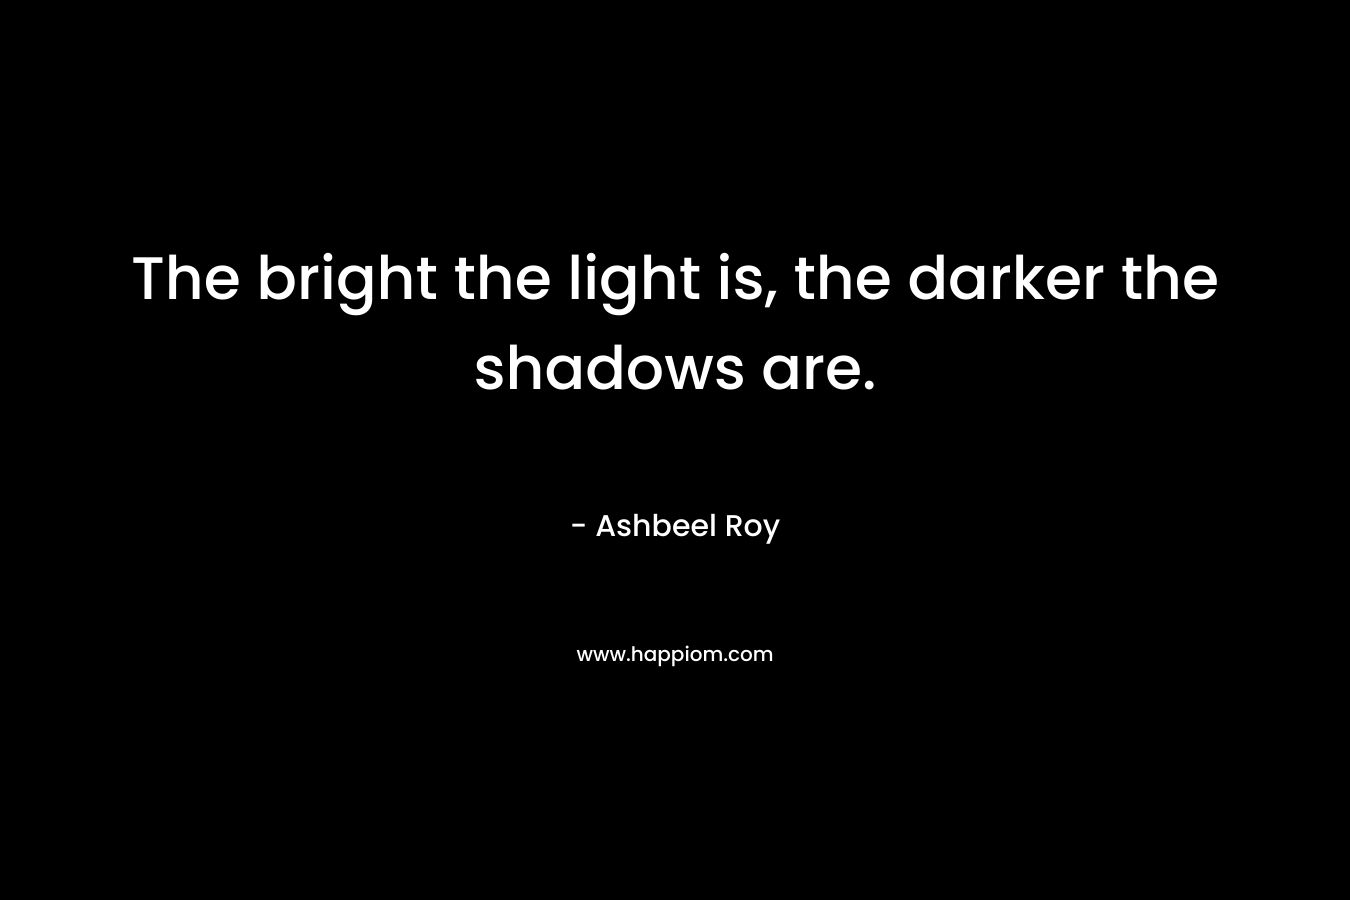 The bright the light is, the darker the shadows are. – Ashbeel Roy